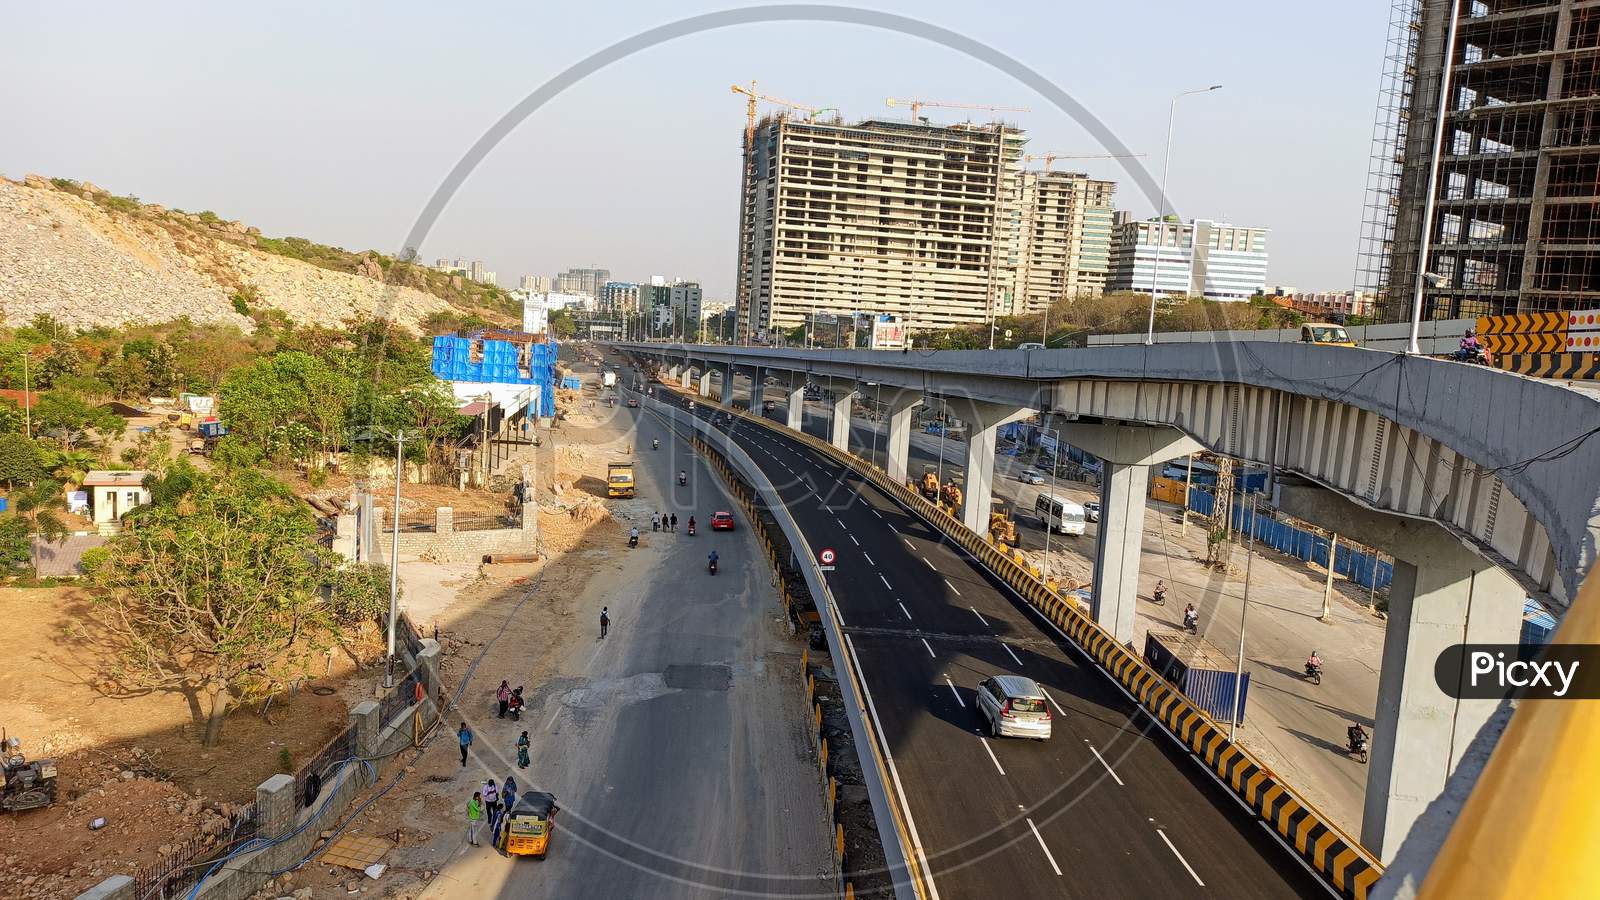 MA&UD Minister Sri KTR inaugurated the first level flyover at Biodiversity Junction in Hyderabad today.